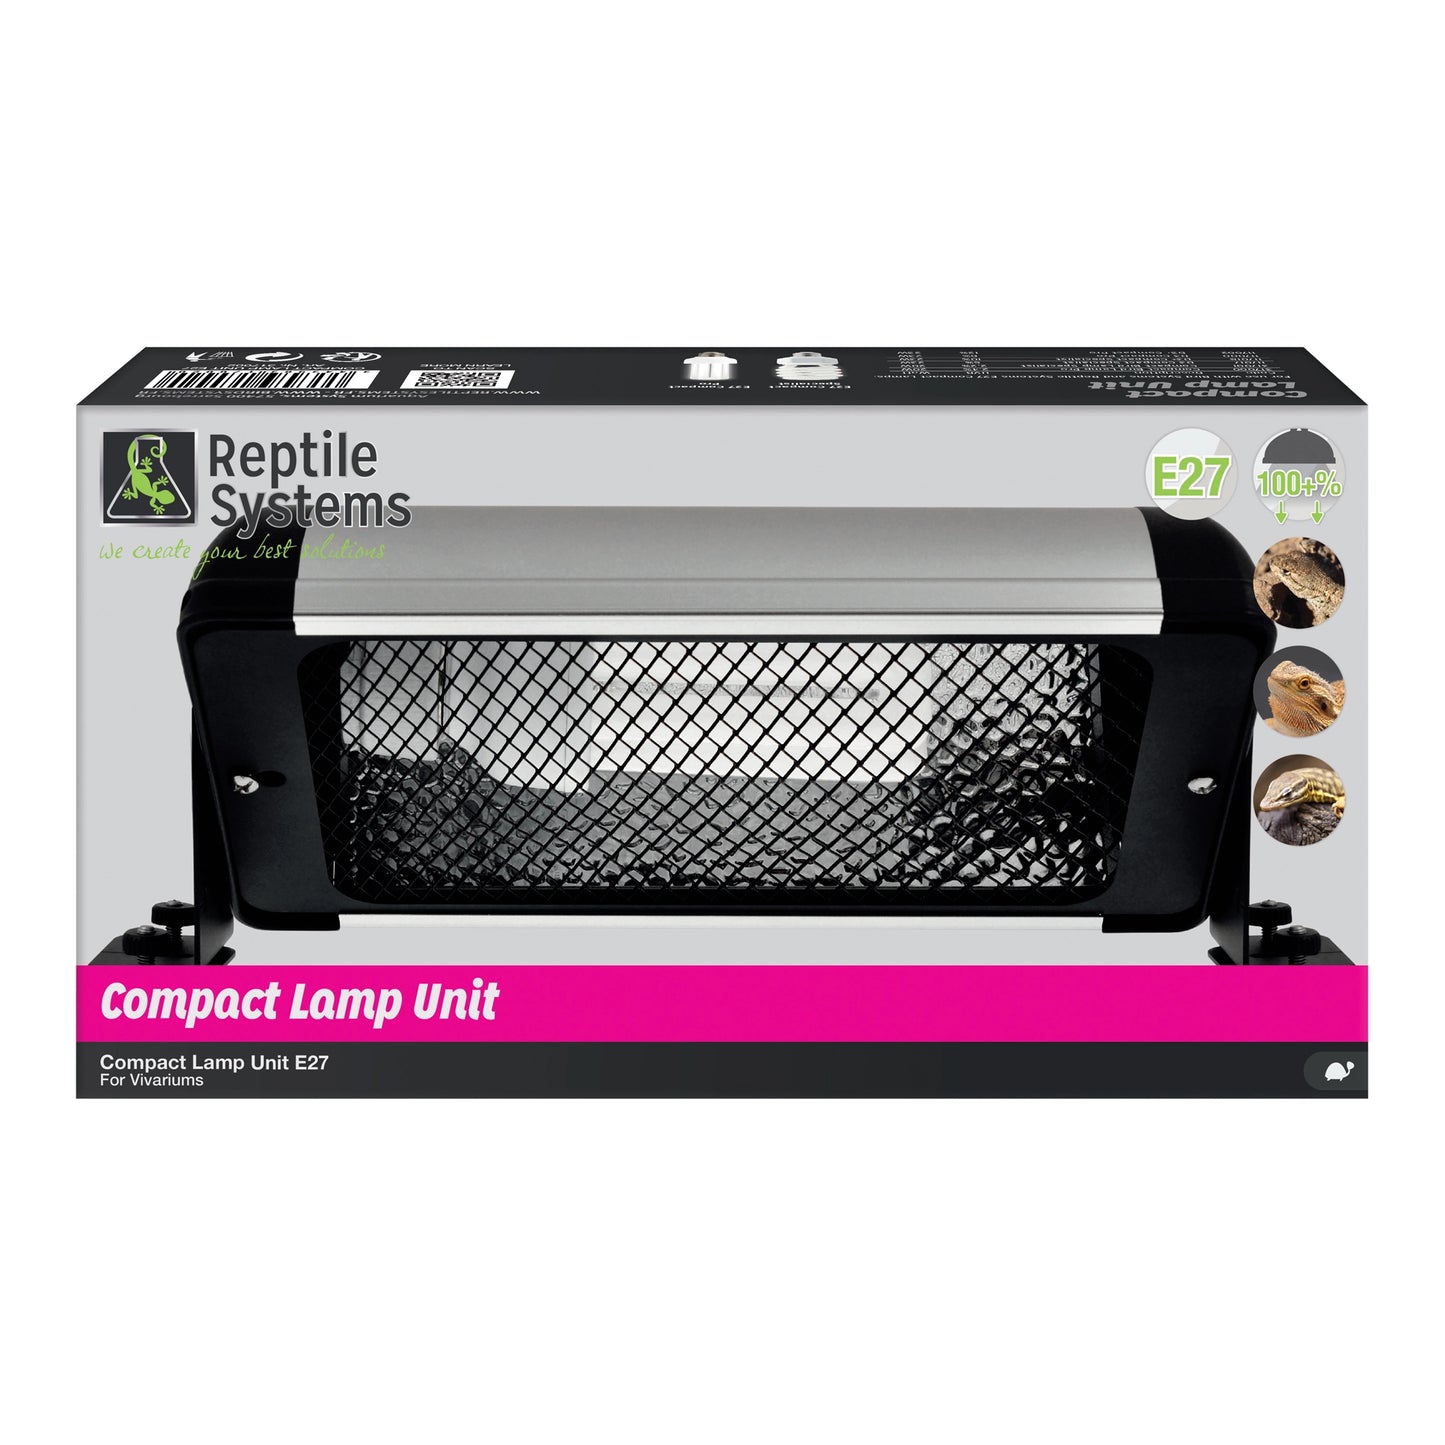 Reptile systems light projector Compact Lamp Unit